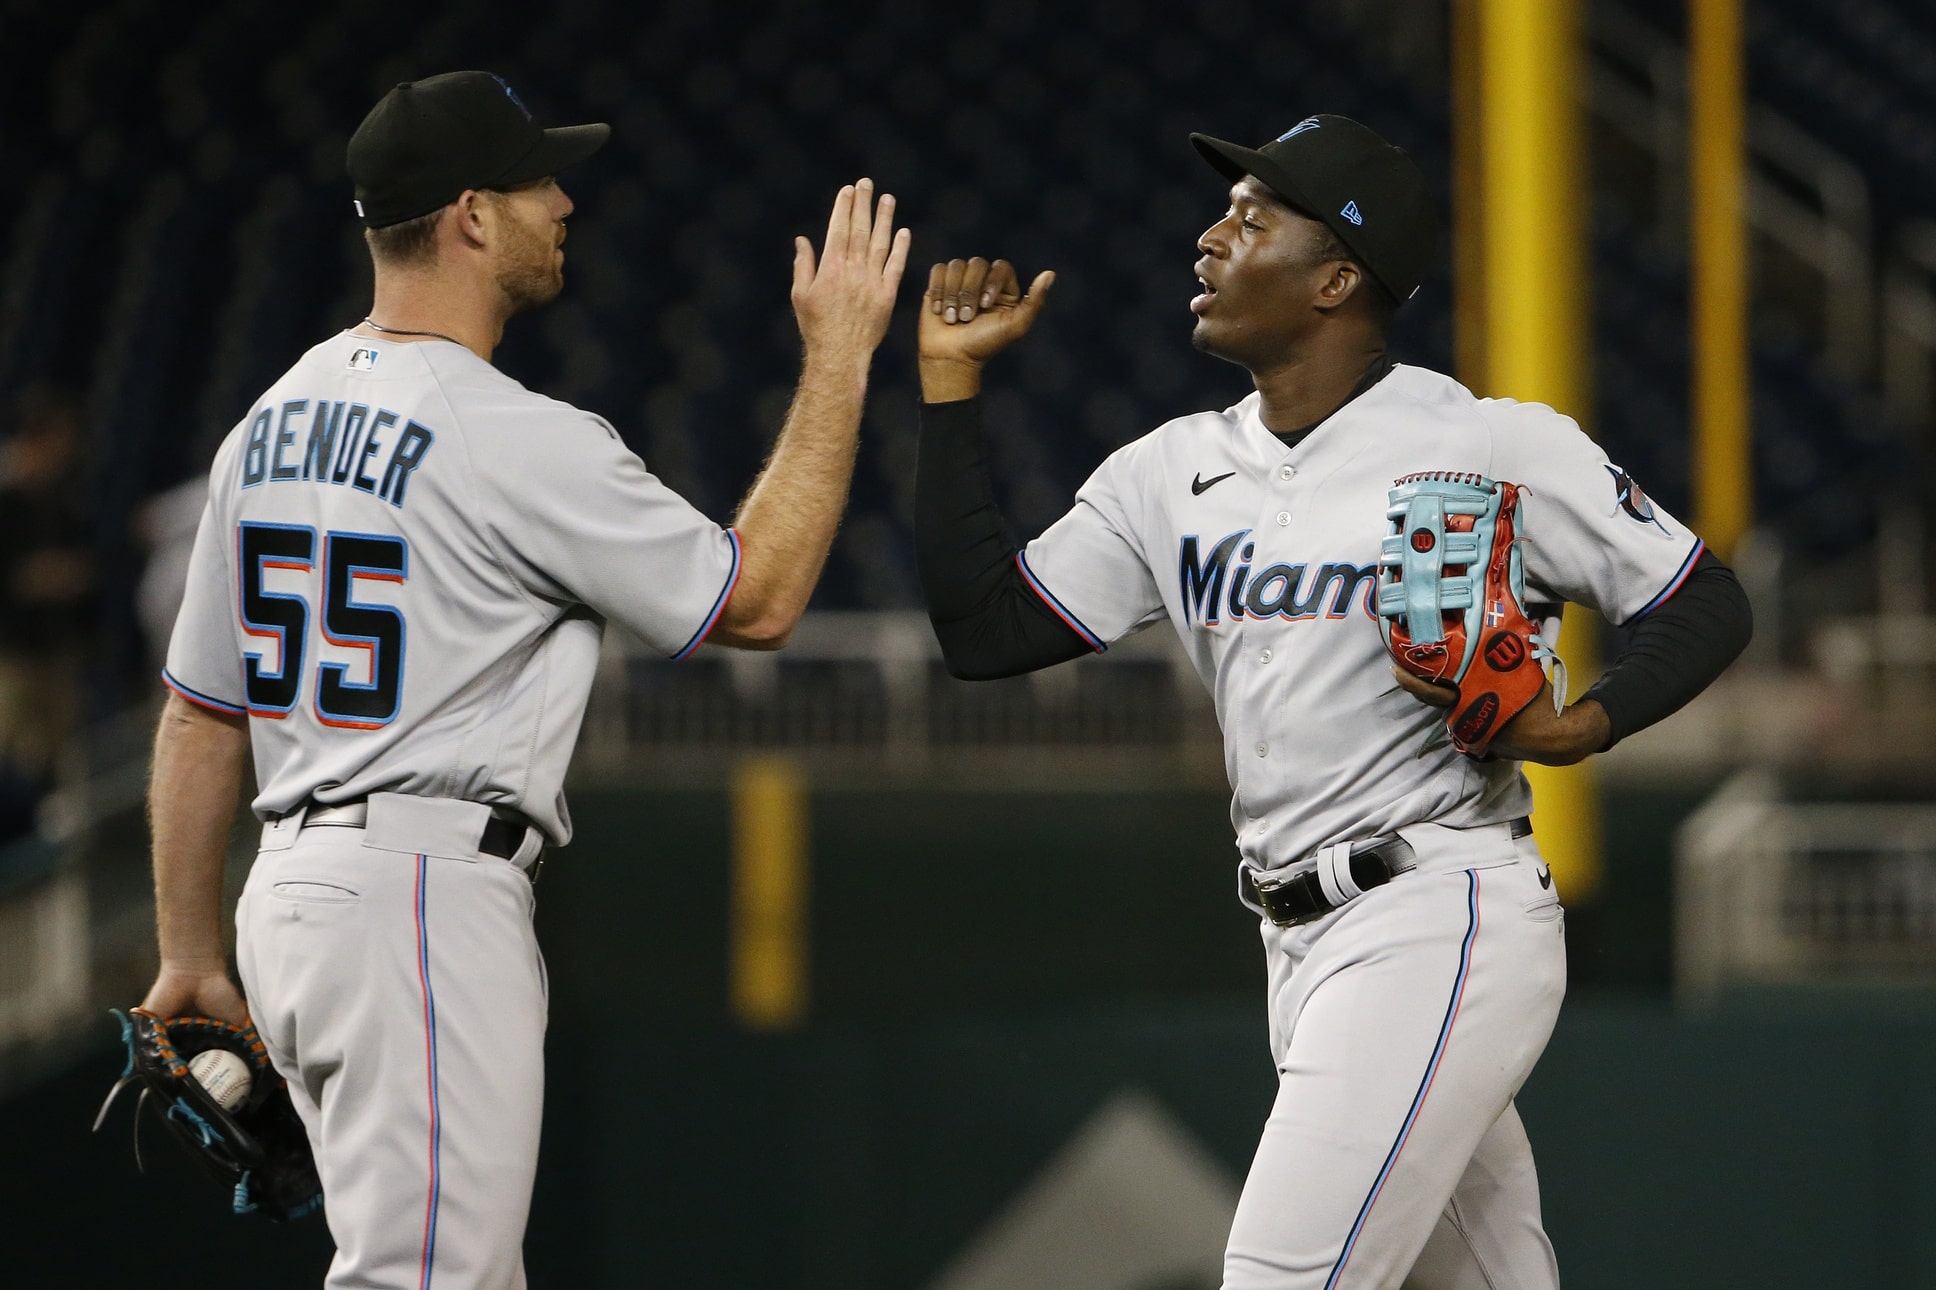 Miami Marlins center fielder Jesus Sanchez (7) celebrates with Miami Marlins relief pitcher Anthony Bender (55) after defeating the Washington Nationals at Nationals Park.